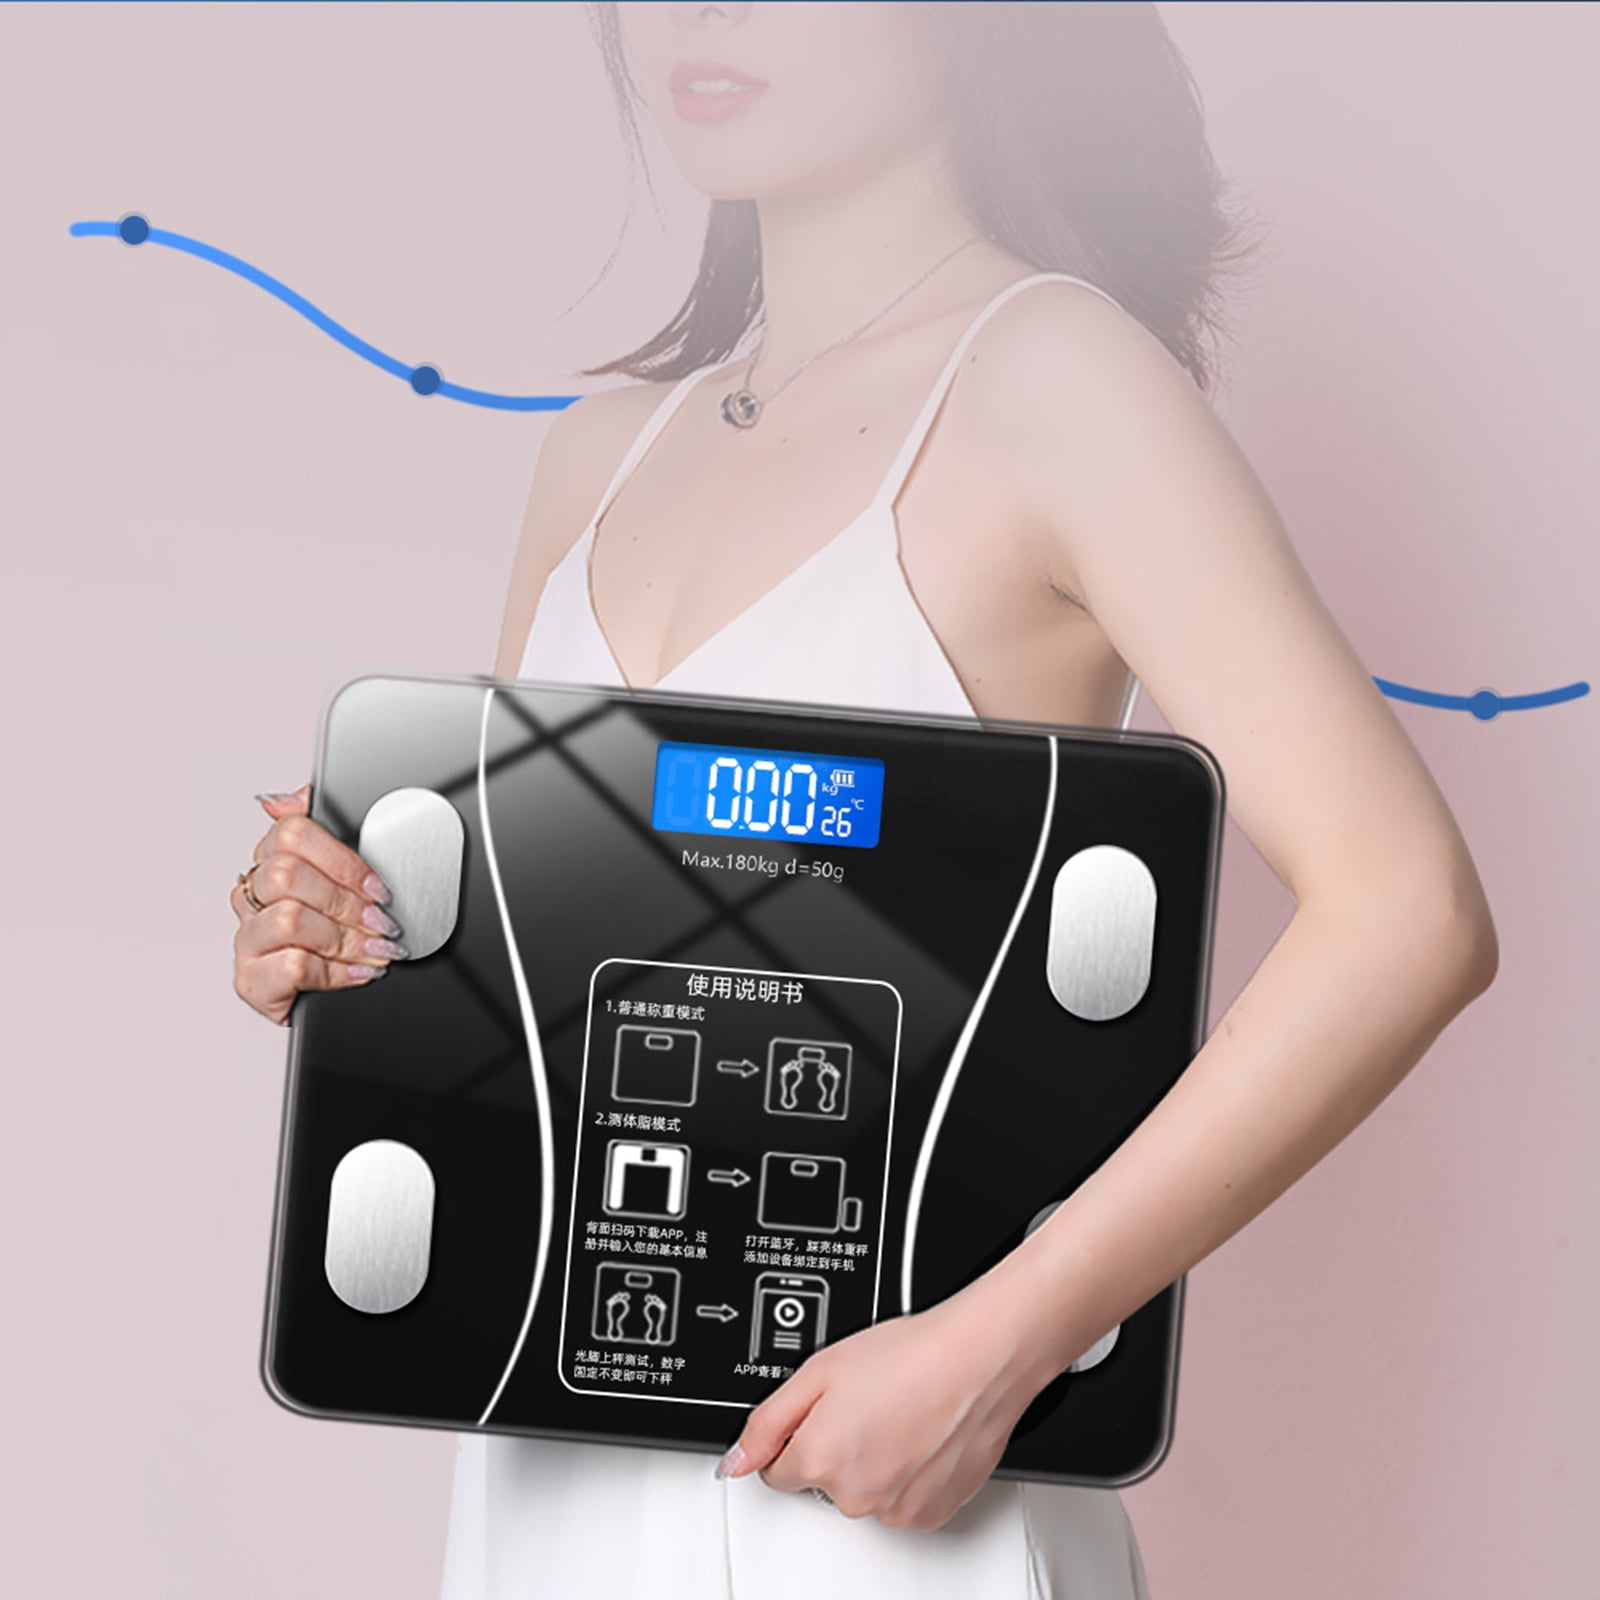  LIFEHOOD Scales Digital Weight and Body Fat - 6mm